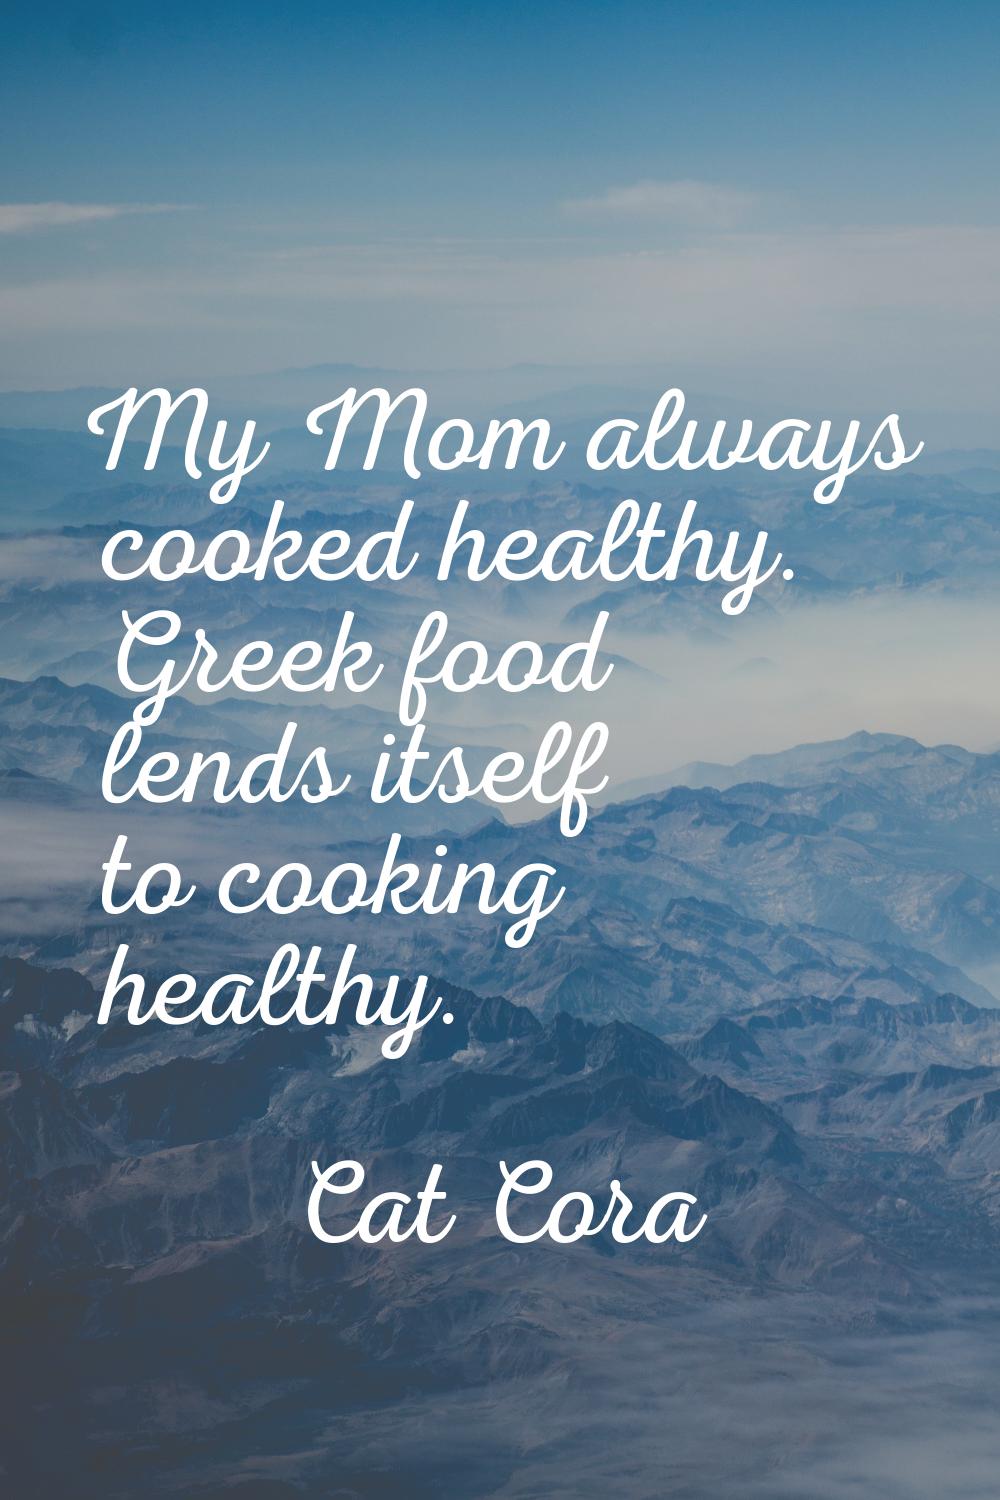 My Mom always cooked healthy. Greek food lends itself to cooking healthy.